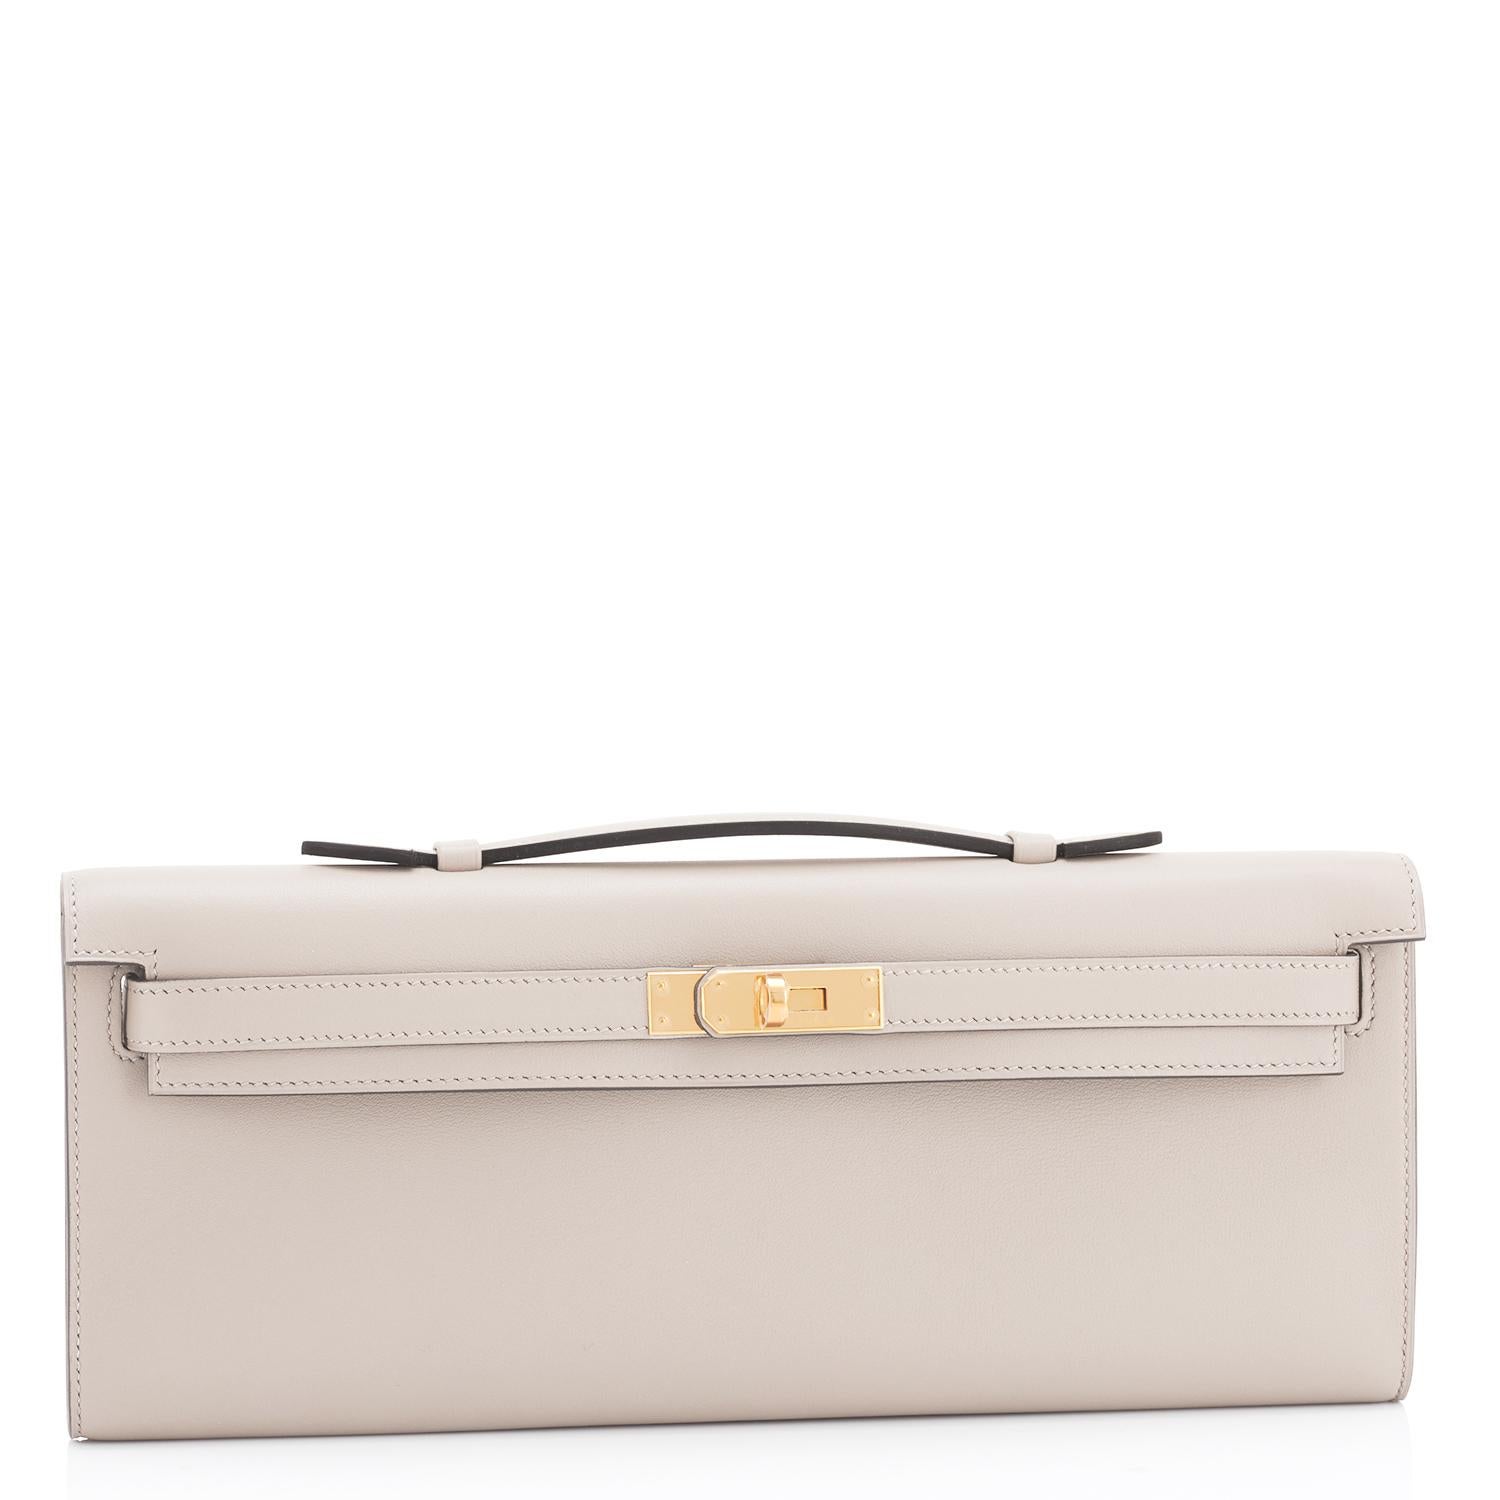 Guaranteed Authentic Hermes Kelly Cut Beton Cream Grey Clutch Swift Gold Hardware Y Stamp, 2020
Brand New in Box. Store fresh. Pristine condition (with plastic on hardware).
Just purchased from Hermes store; bag bears new 2020 interior Y